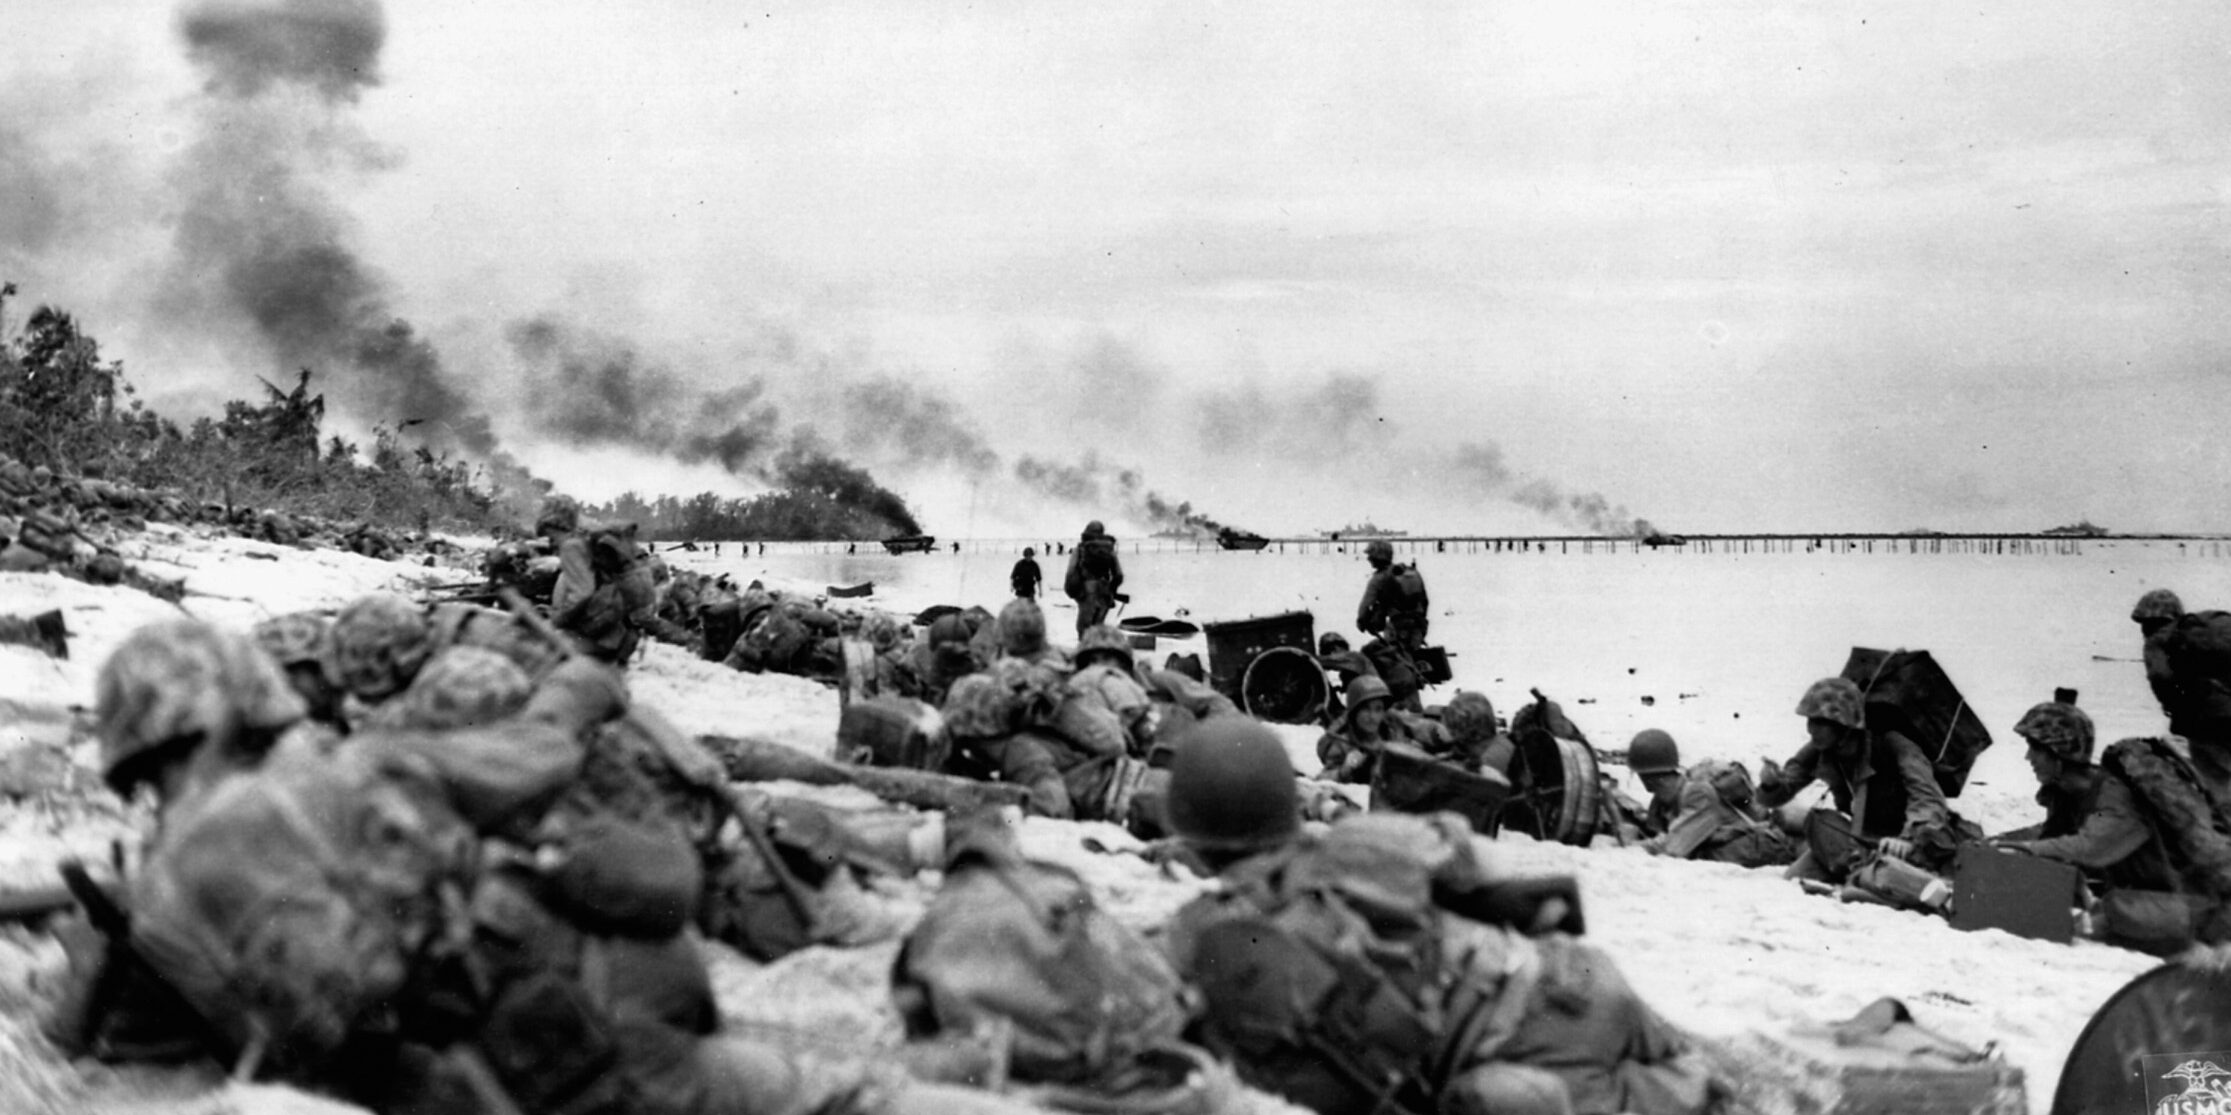 Marines land on “Orange One” beach at Peleliu. Minutes later, the relative calm would be broken and the Marines would meet fanatical Japanese resistance.